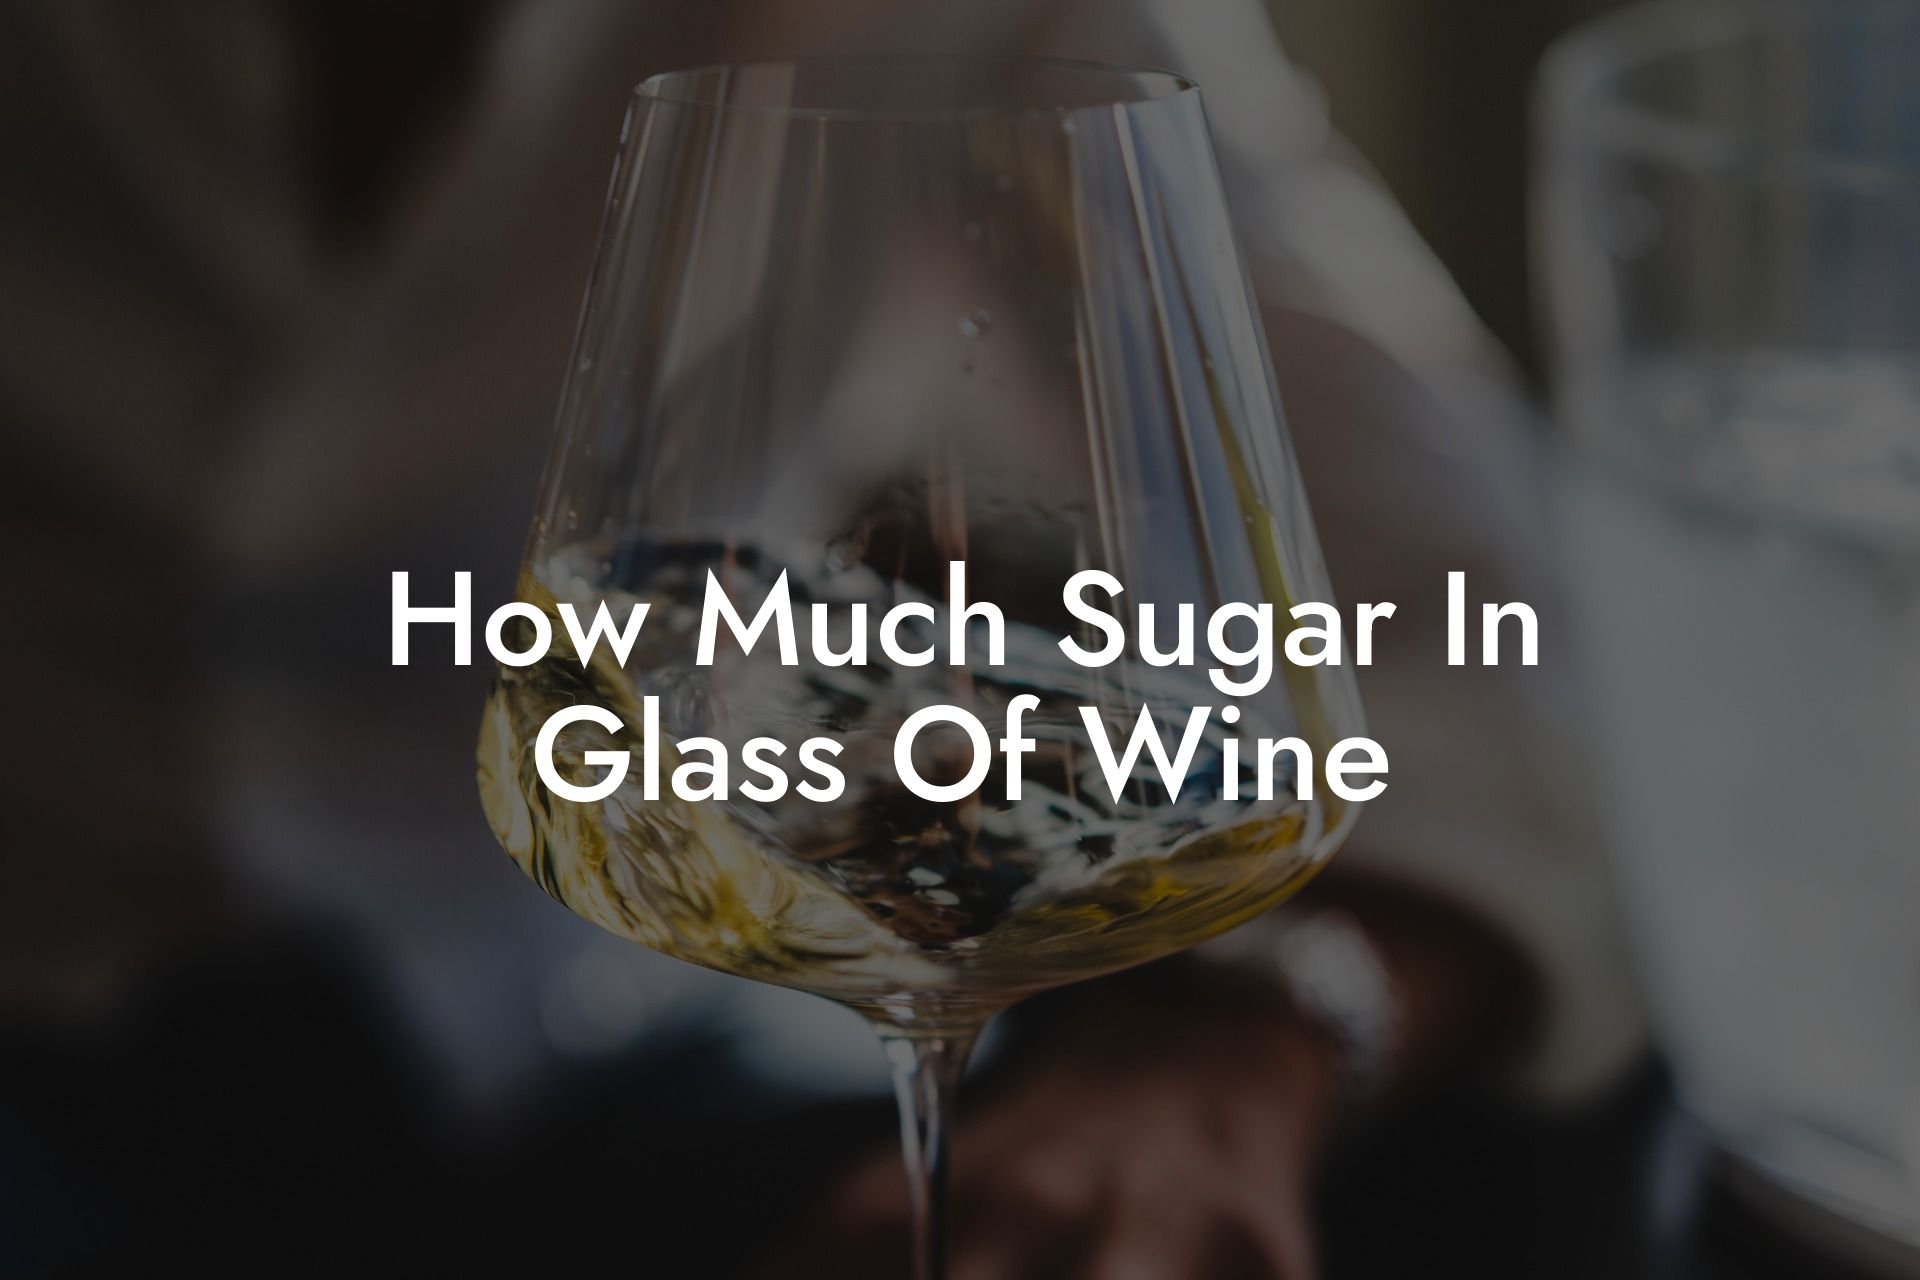 How Much Sugar In Glass Of Wine